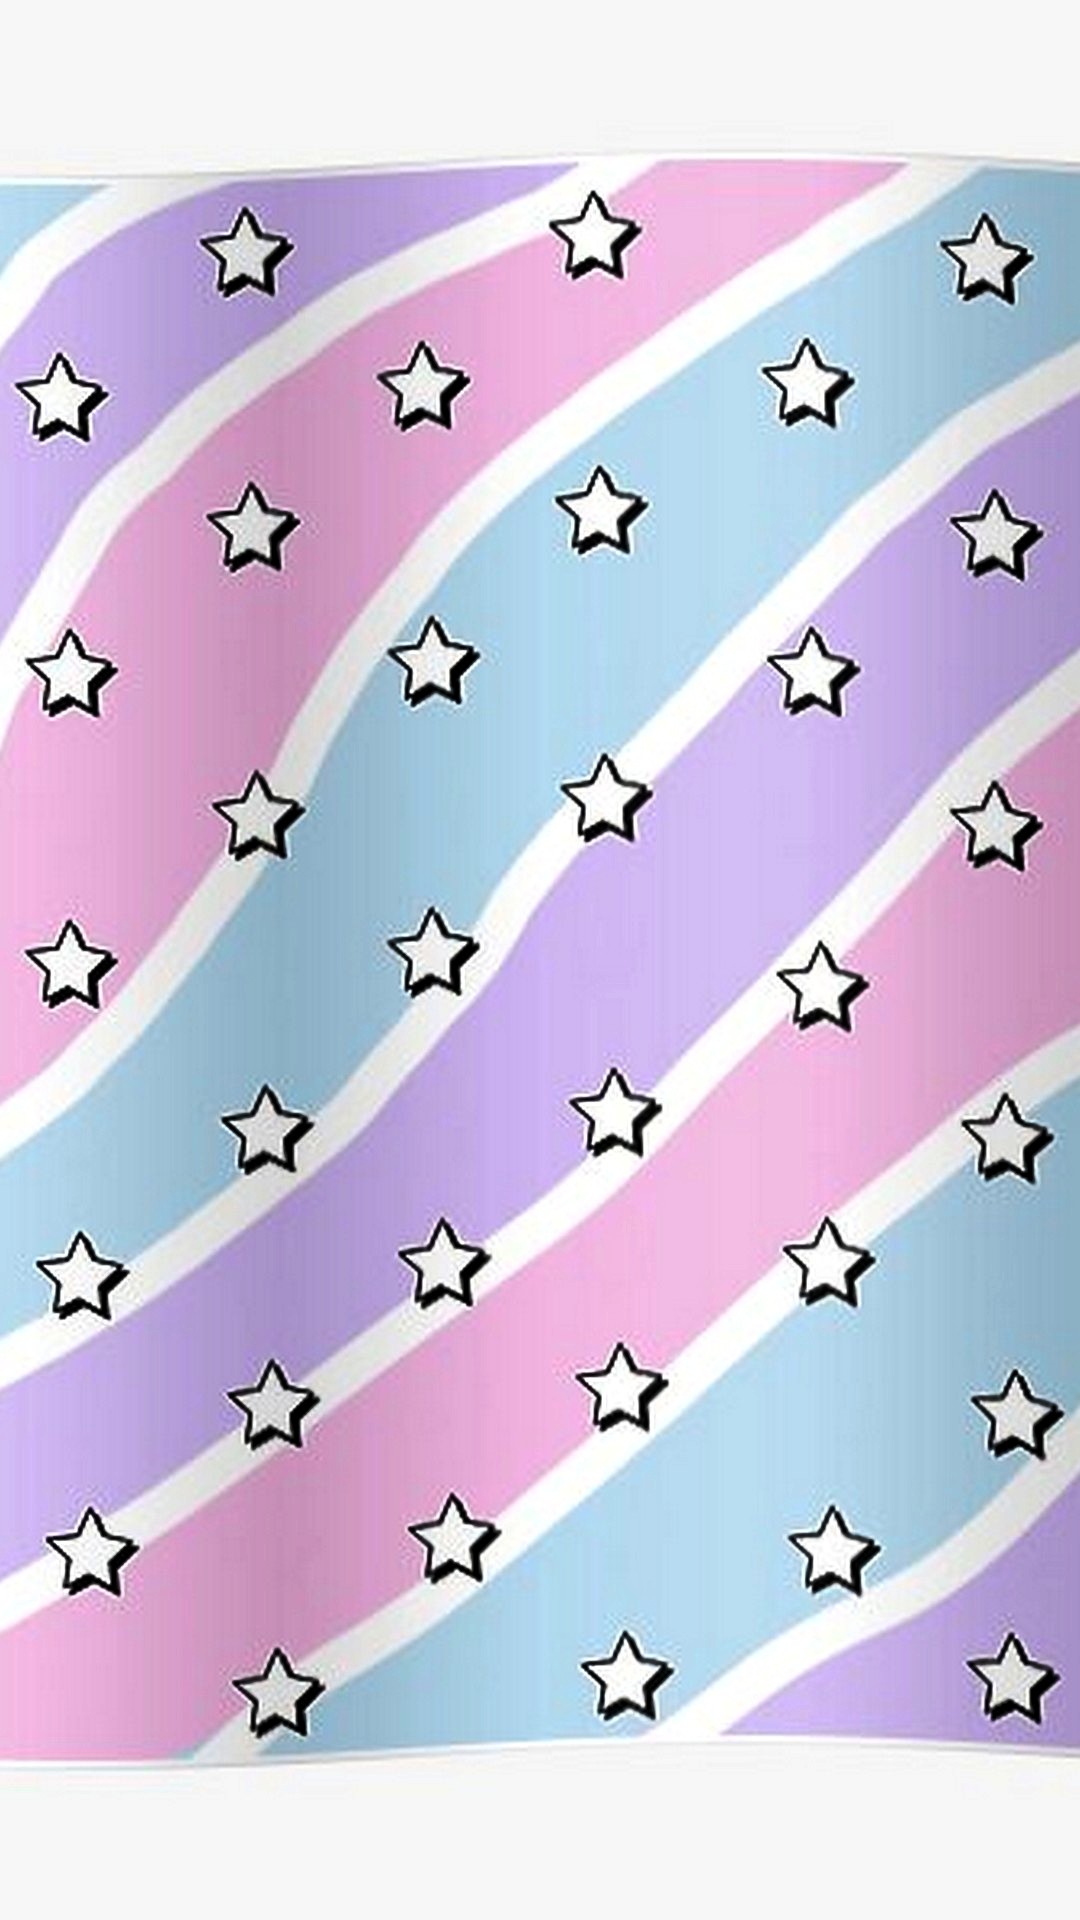 Stars Aesthetic Wallpaper iPhone With high-resolution 1080X1920 pixel. You can use this wallpaper for your iPhone 5, 6, 7, 8, X, XS, XR backgrounds, Mobile Screensaver, or iPad Lock Screen